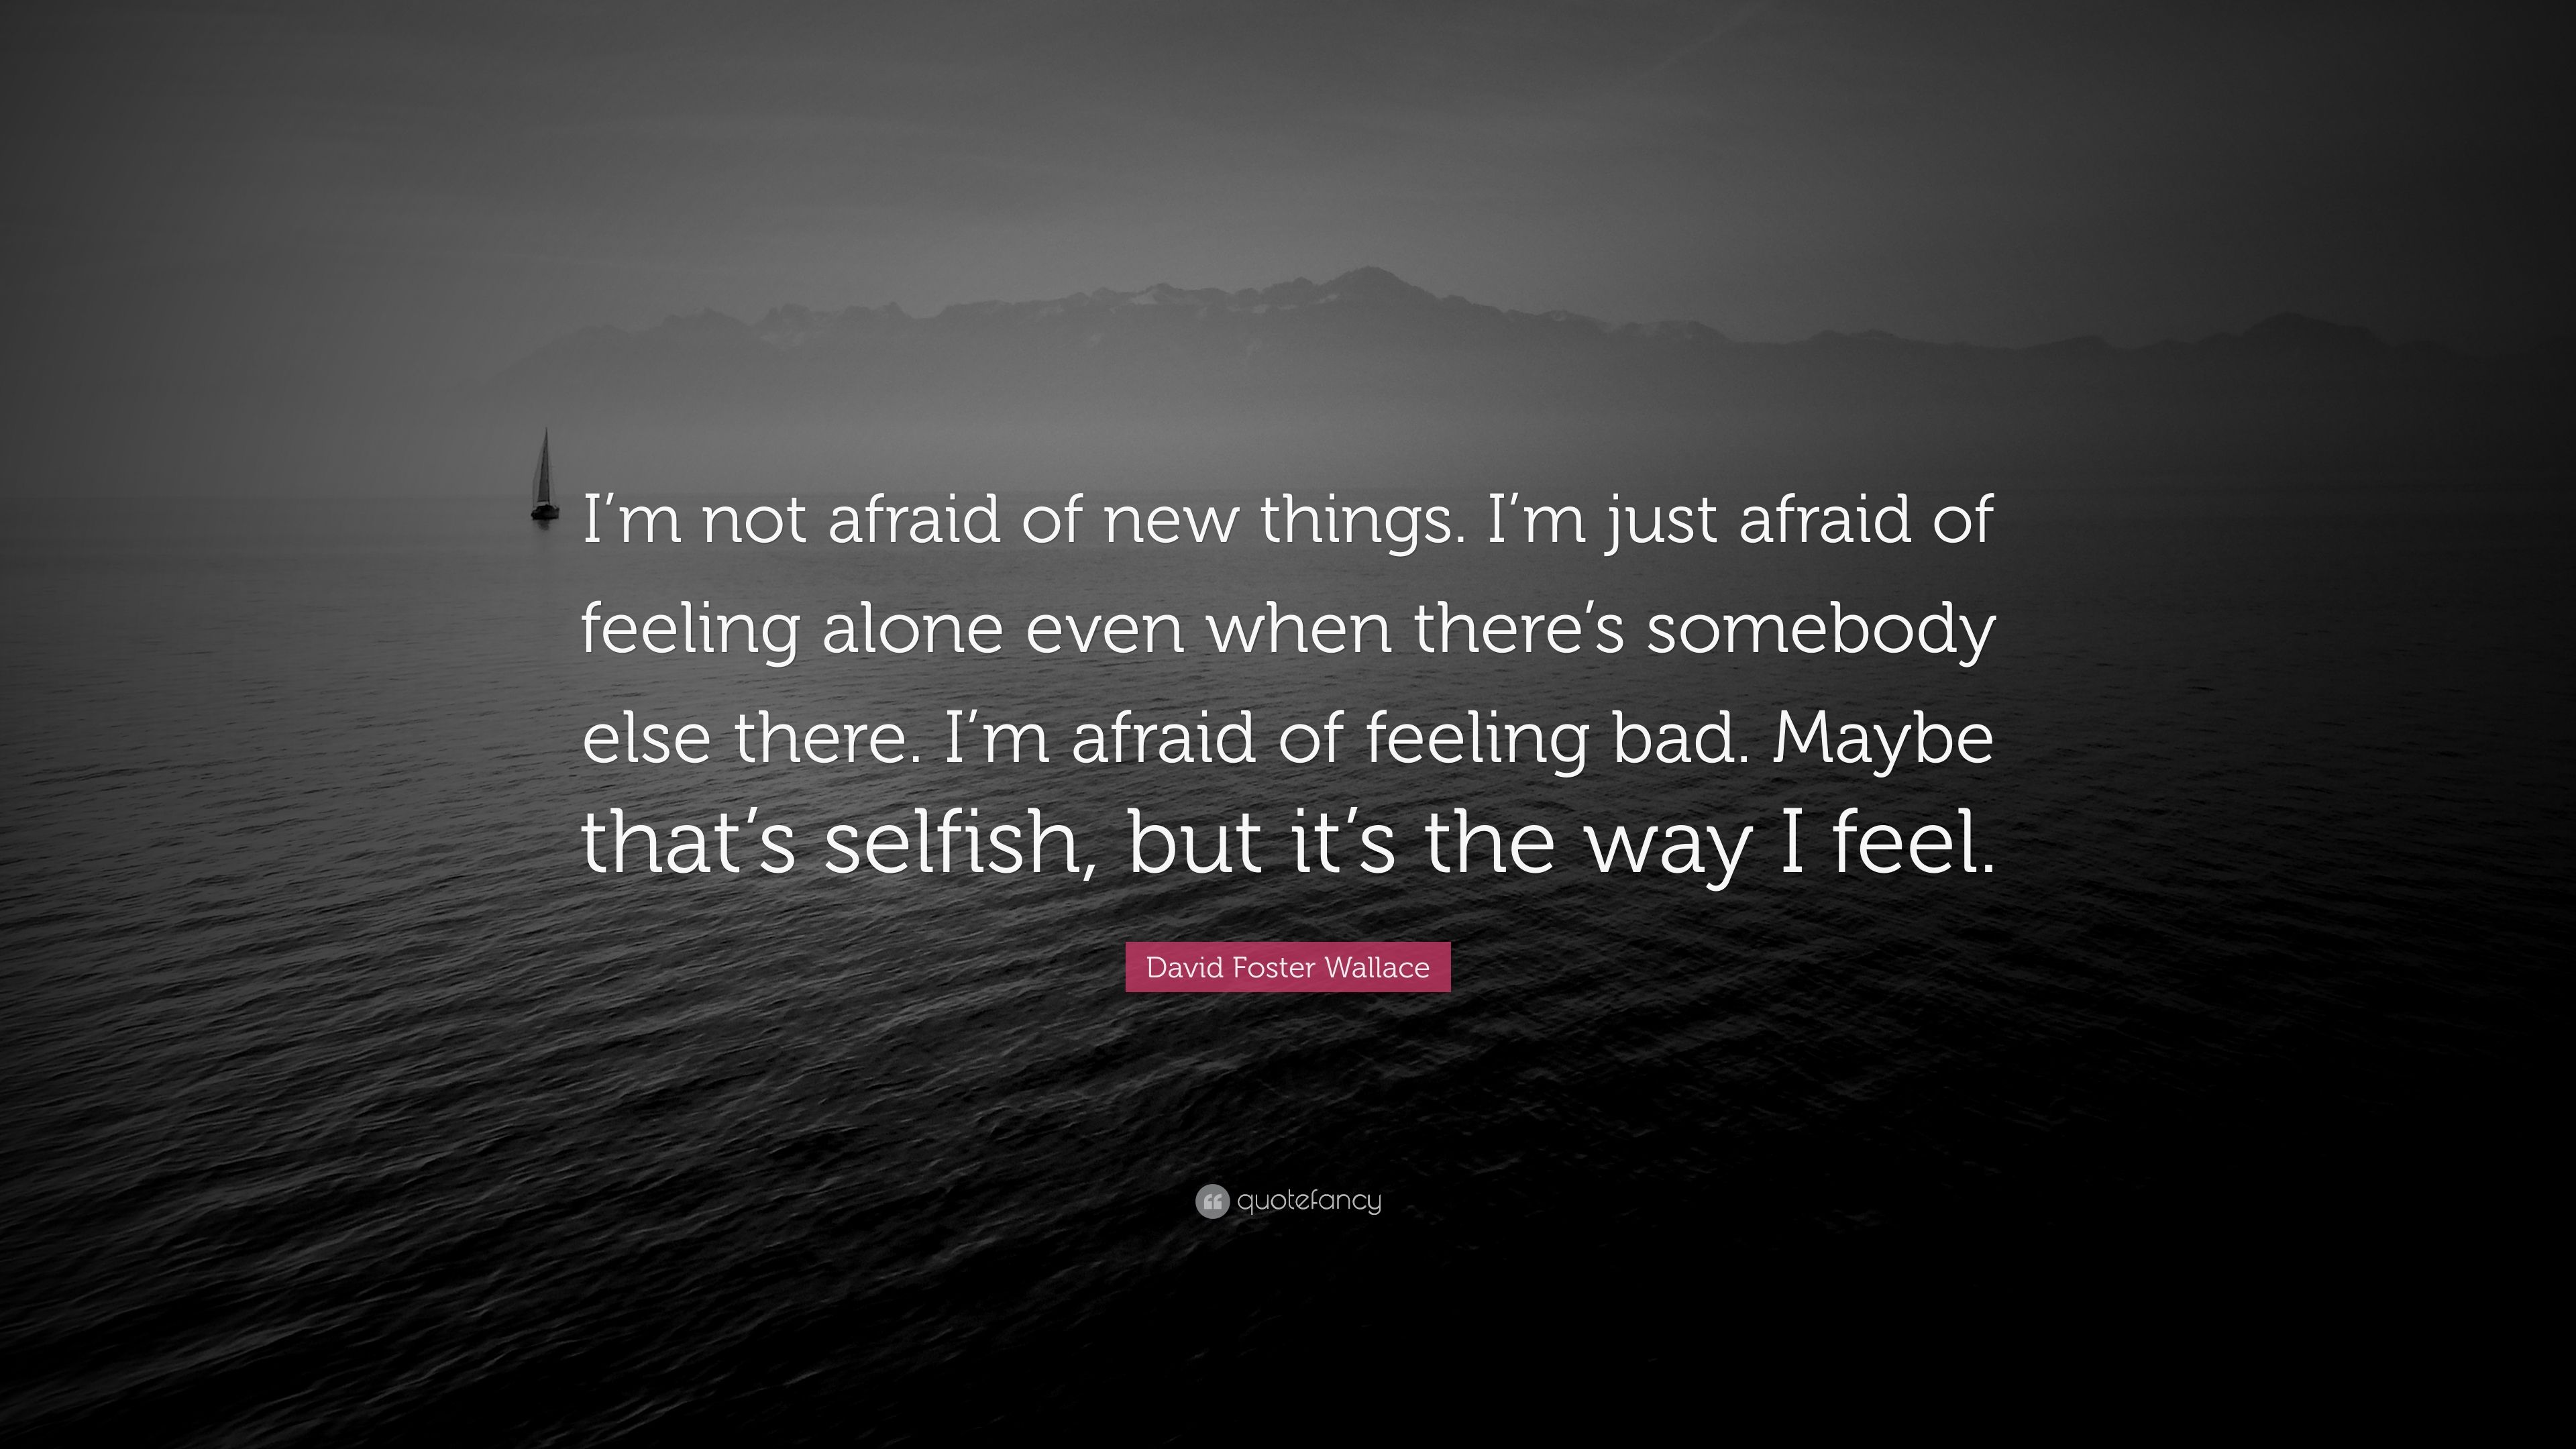 David Foster Wallace Quote: “I'm not afraid of new things. I'm just ...